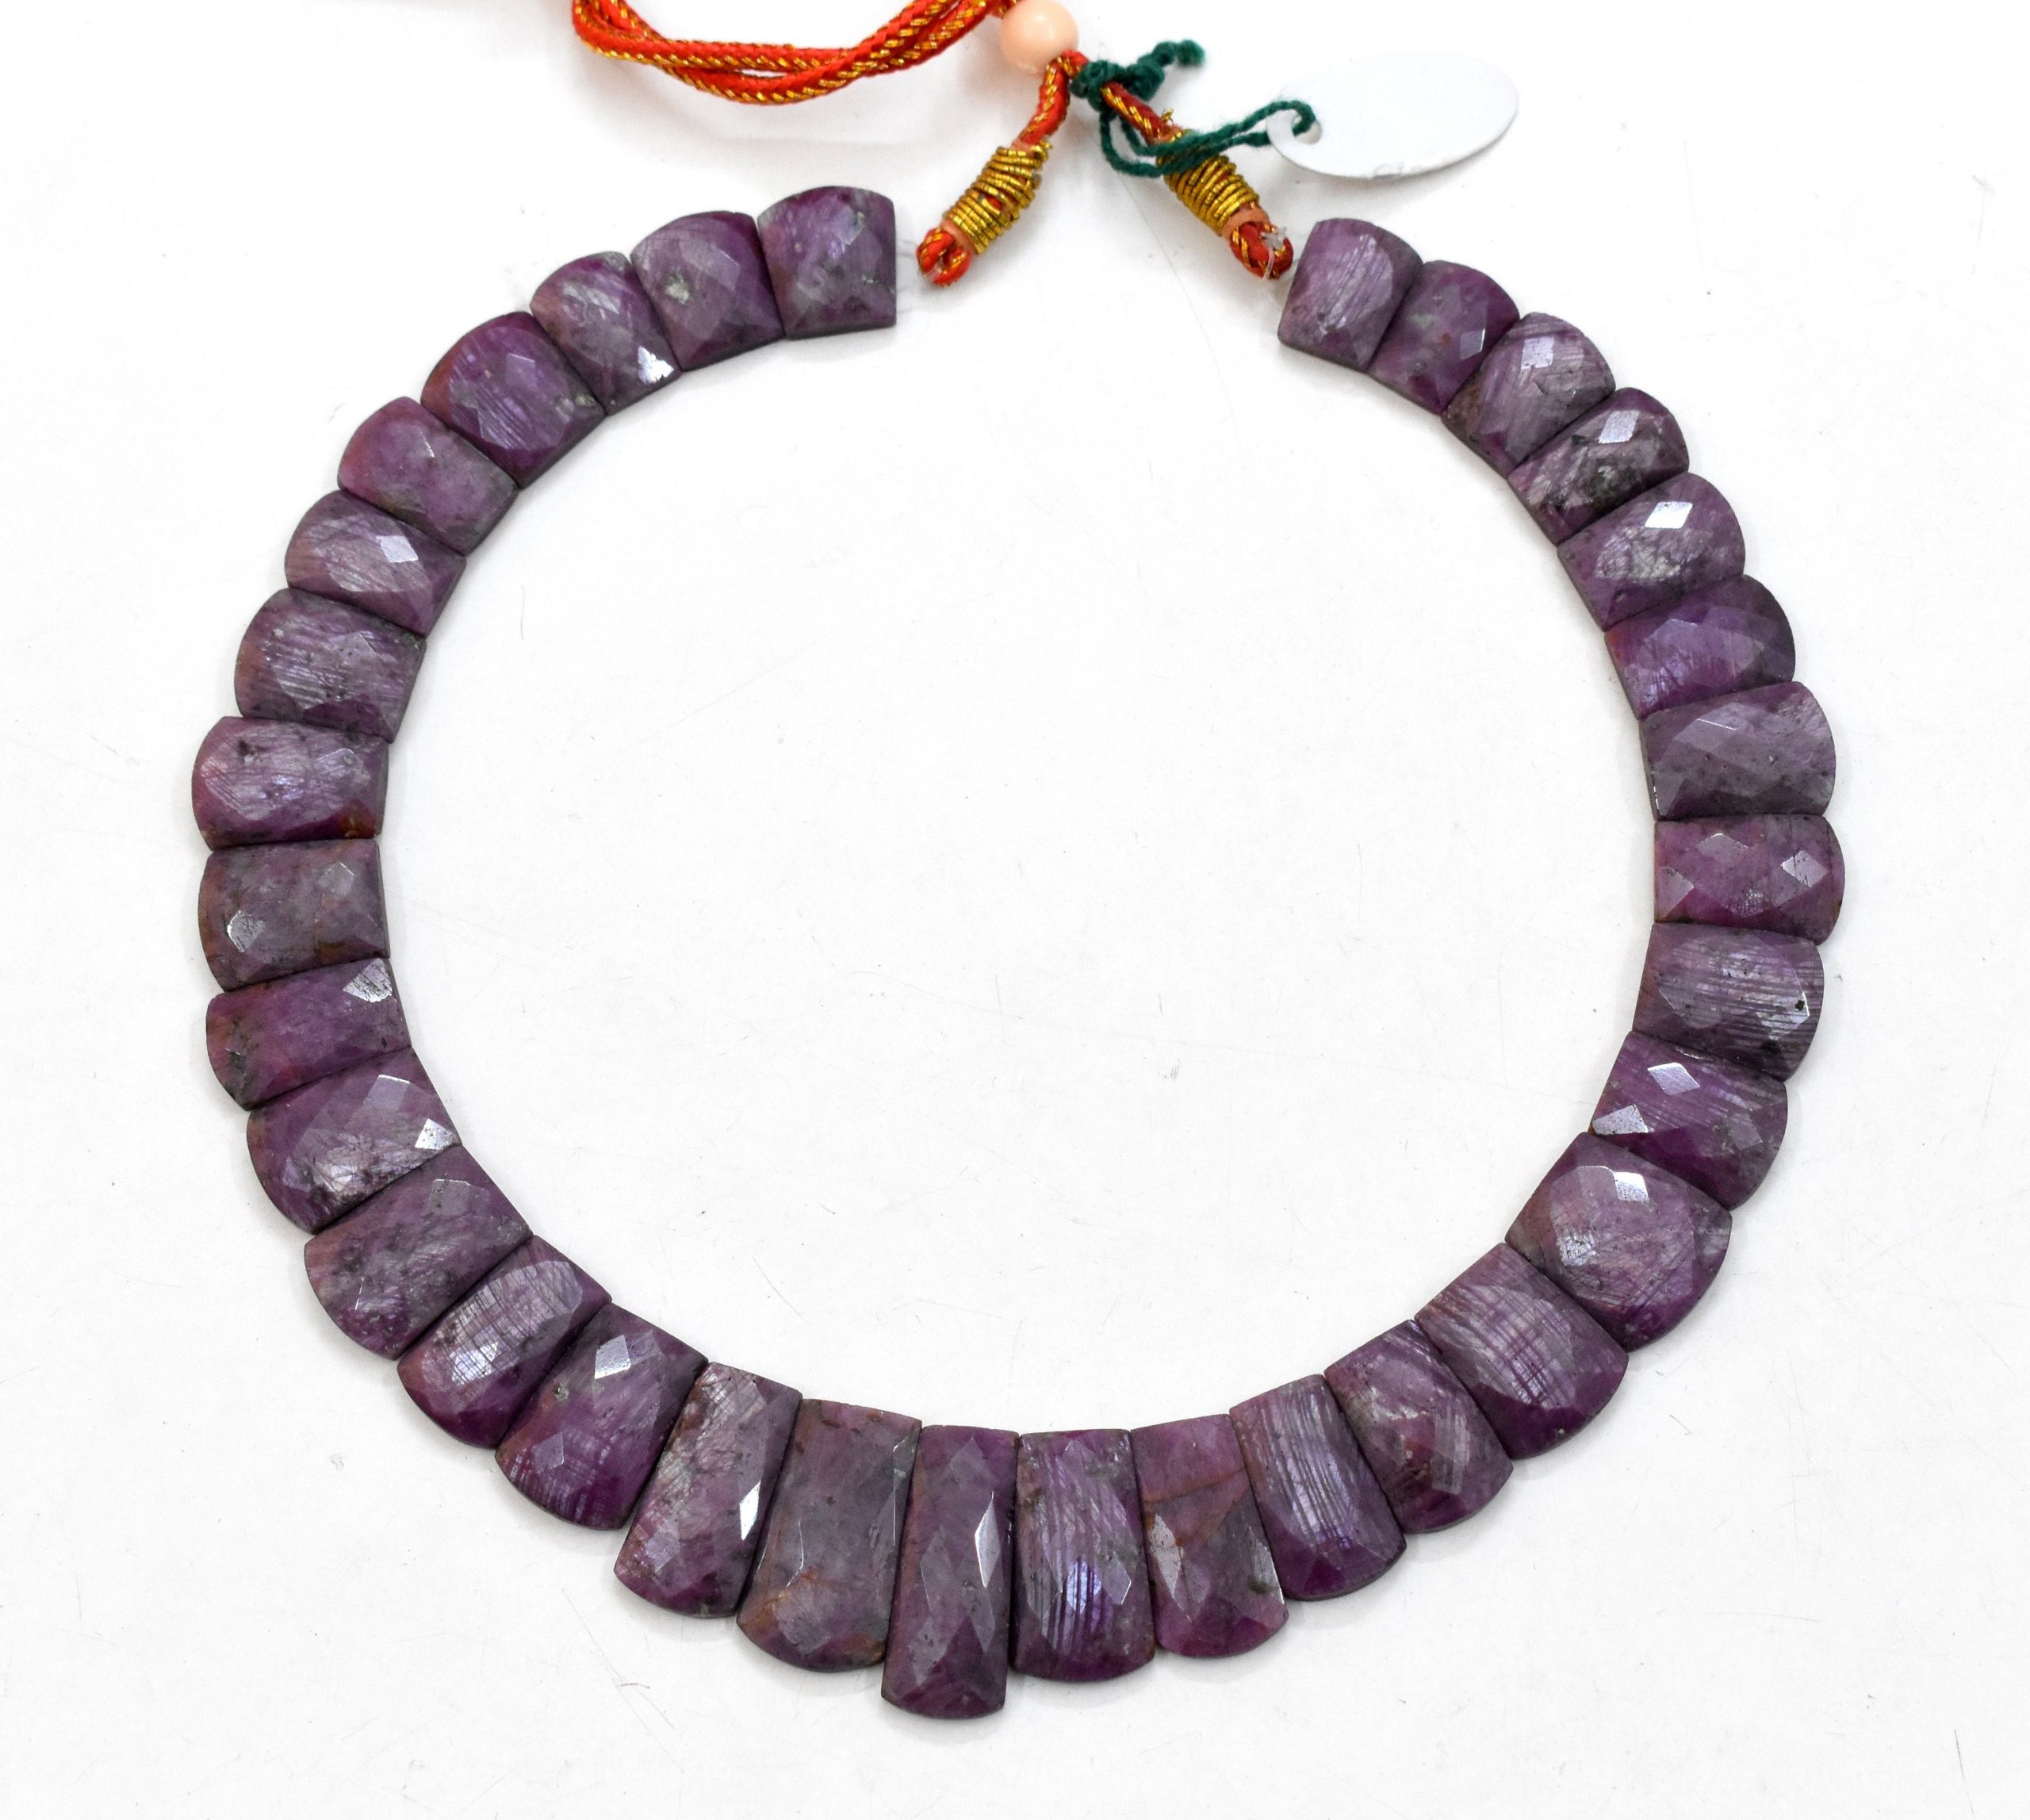 100% Natural Ruby Handmade Necklace,Collar Necklace,Princess Necklace,Choker Necklace,Bib Necklace,Matinee Necklace,Handicraft Necklace. | Save 33% - Rajasthan Living 14